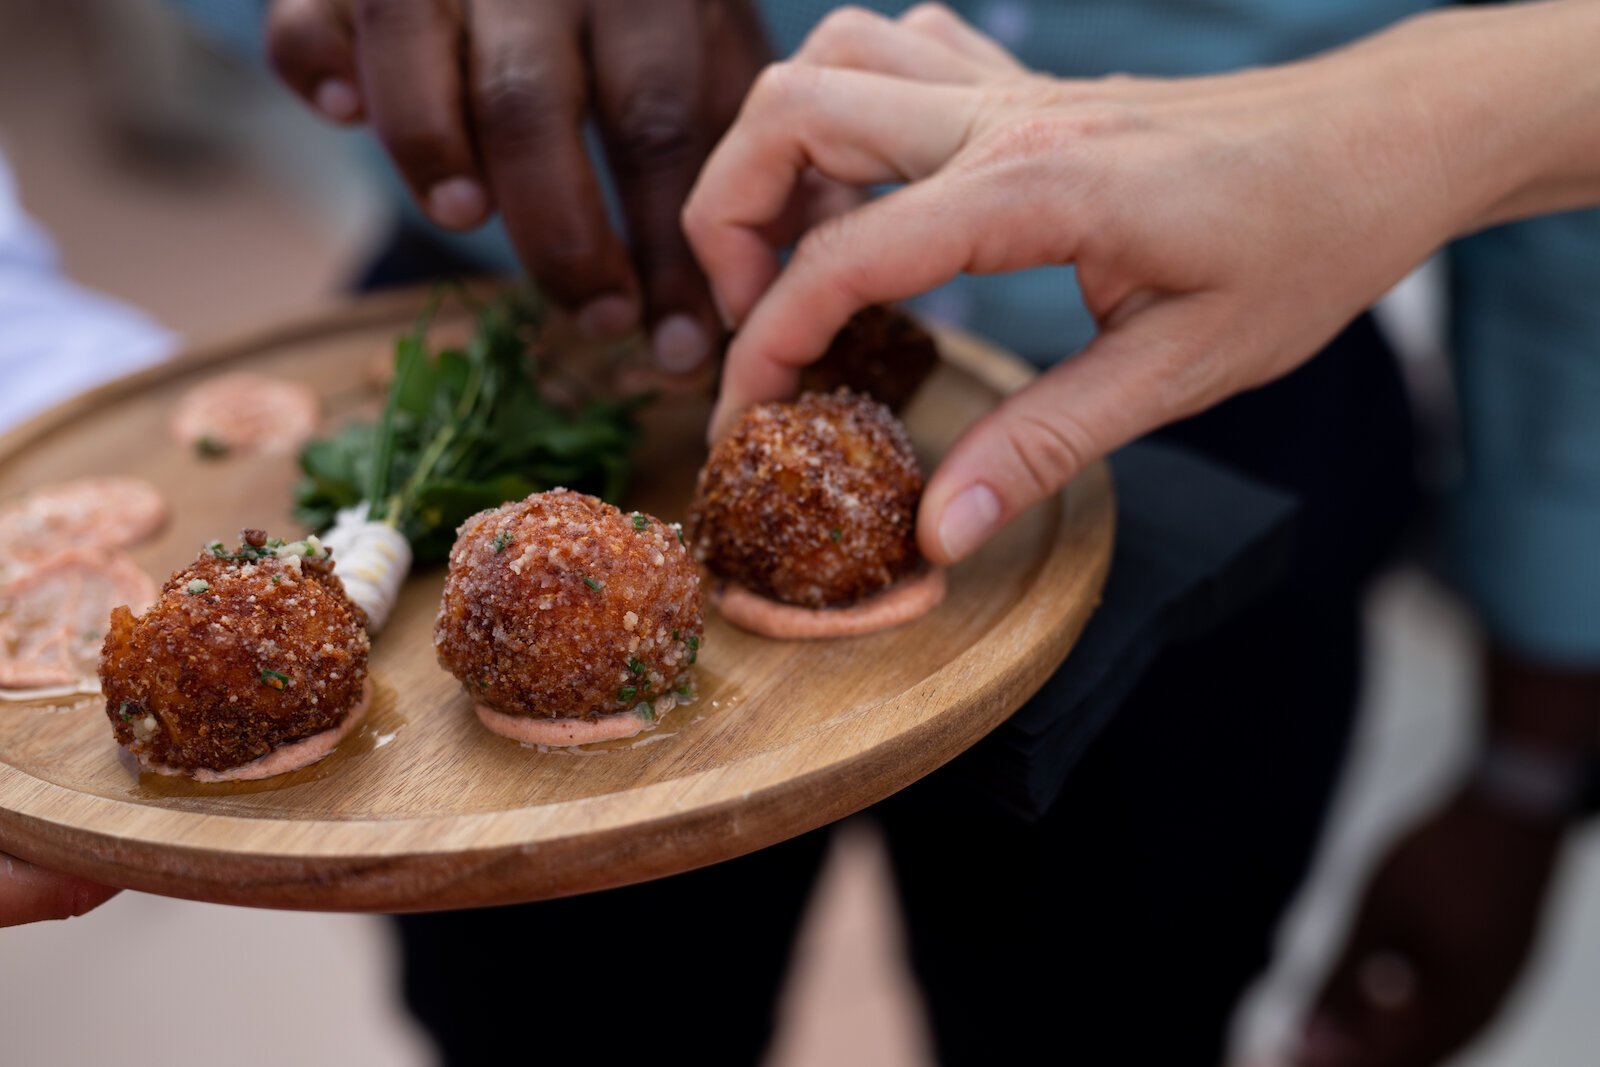 Fried Mac n' Cheese balls are served at Birdie's Rooftop Bar at The Bradley at 204 W. Main St.